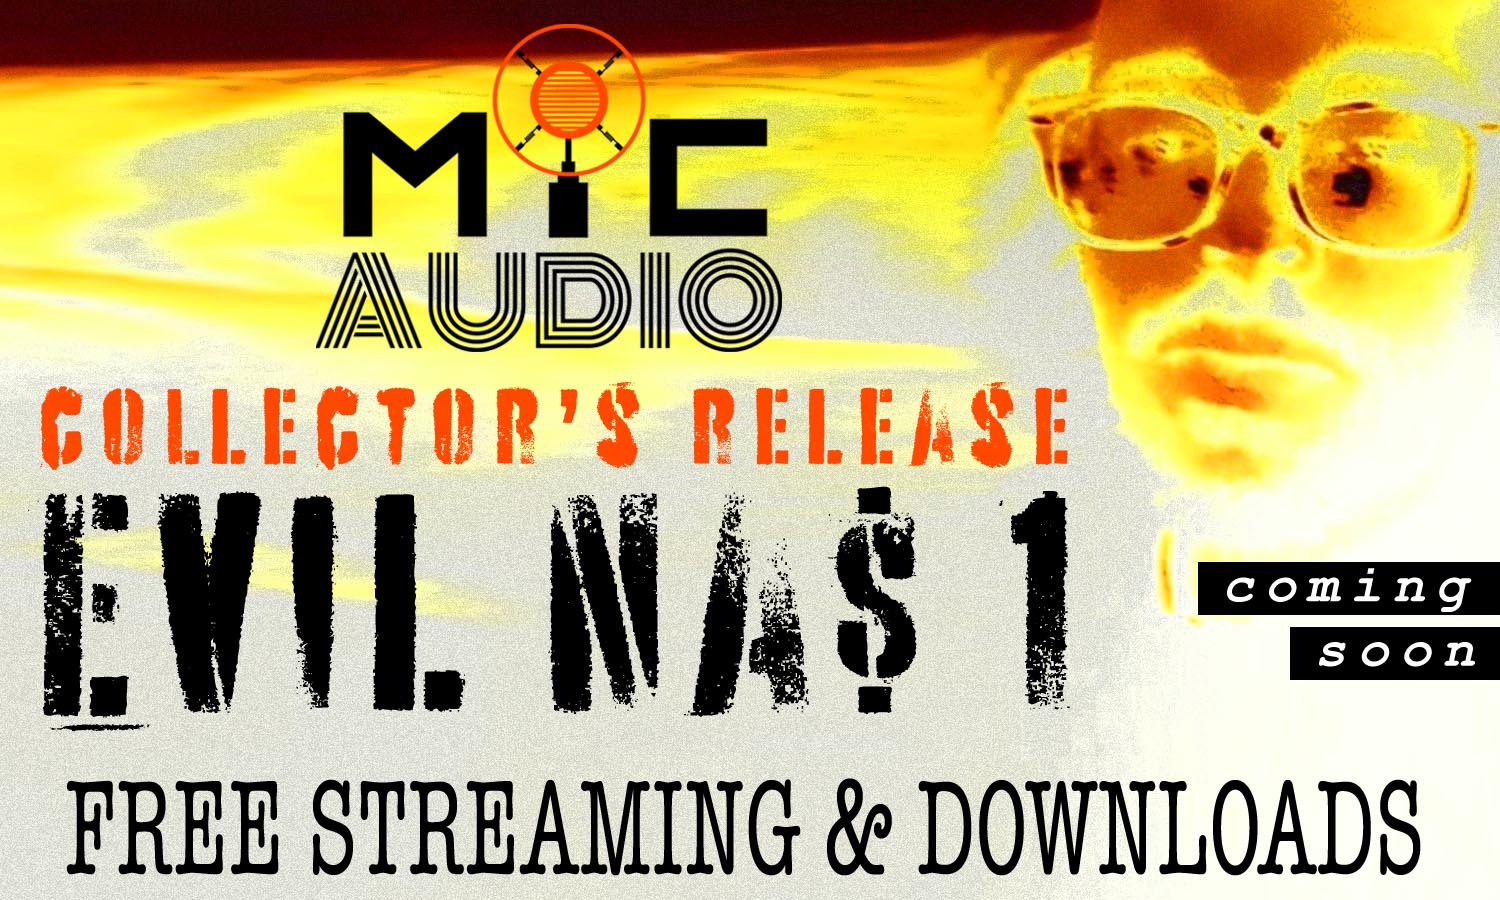 Mic Audio - Evil Na$ 1 Collector's Release | COMING SOON!